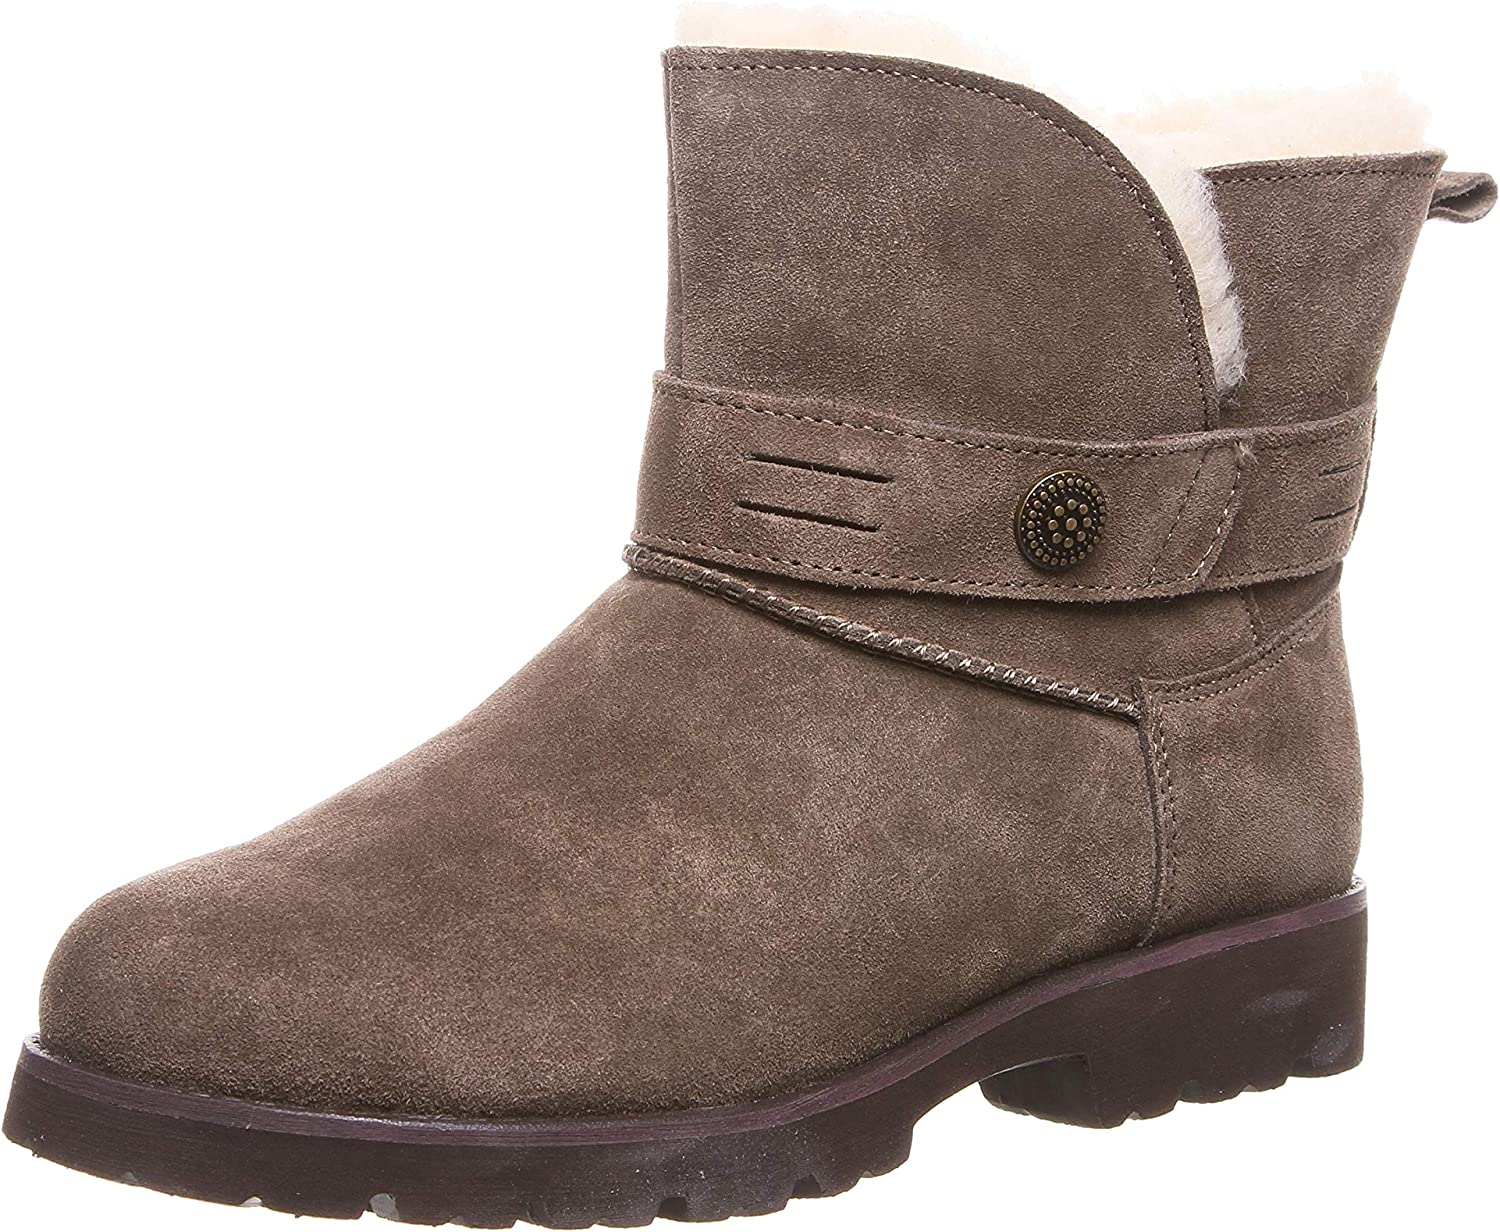 BEARPAW Womens Wellston Suede Slip On Ankle Boots - Seal Brown - 7